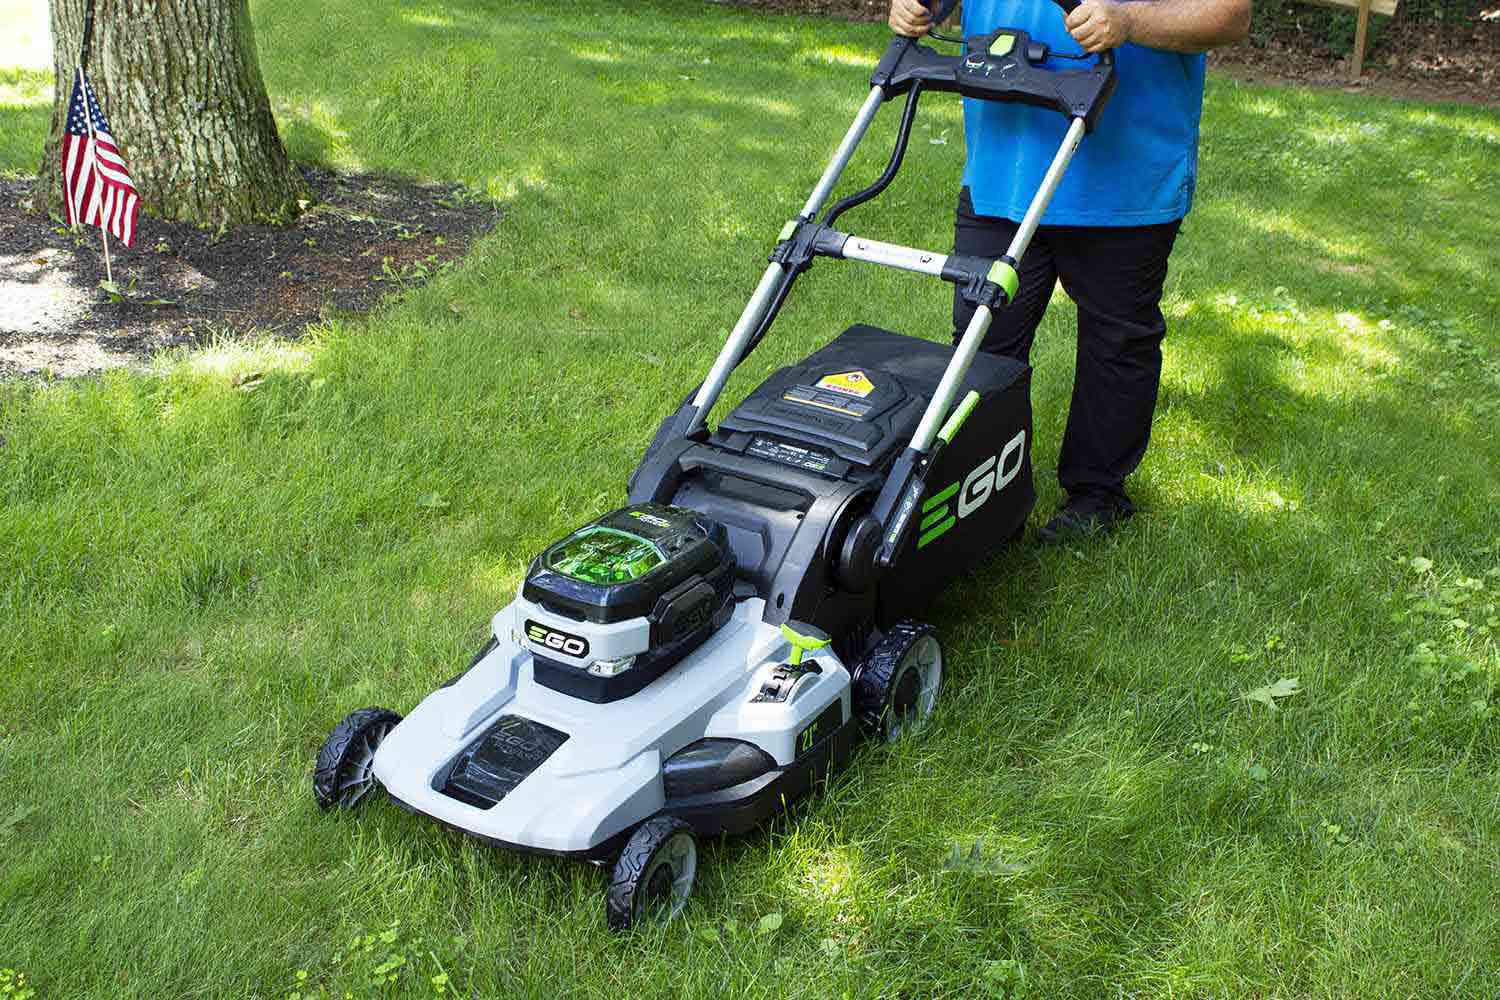 How to Get Exmark Zero-Turn Mowers at Affordable Pricing?